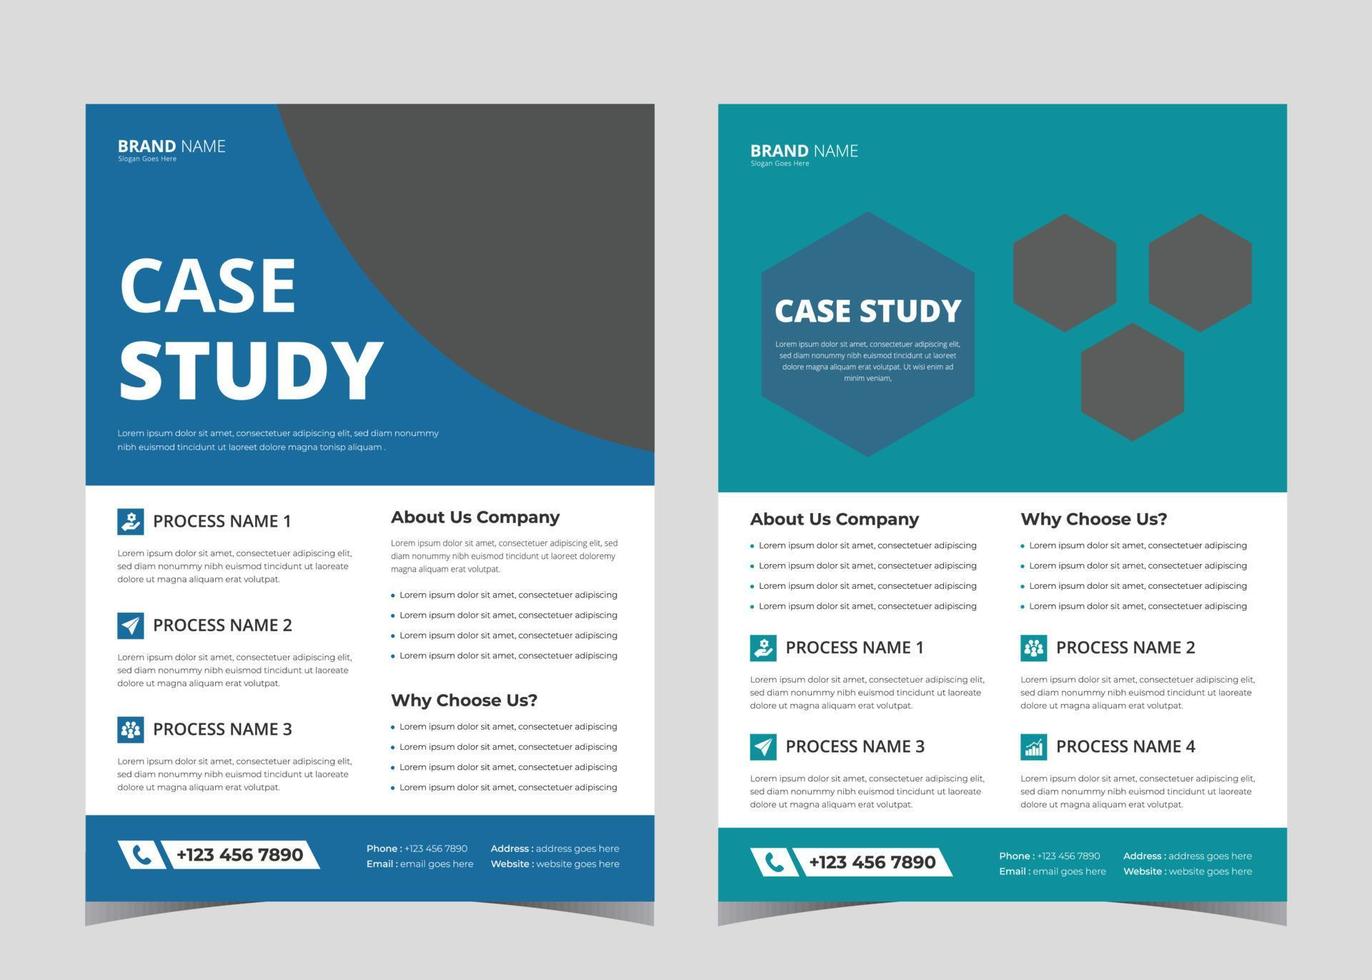 Case Study Flyer Design. Flyer Template design with Case Study ...